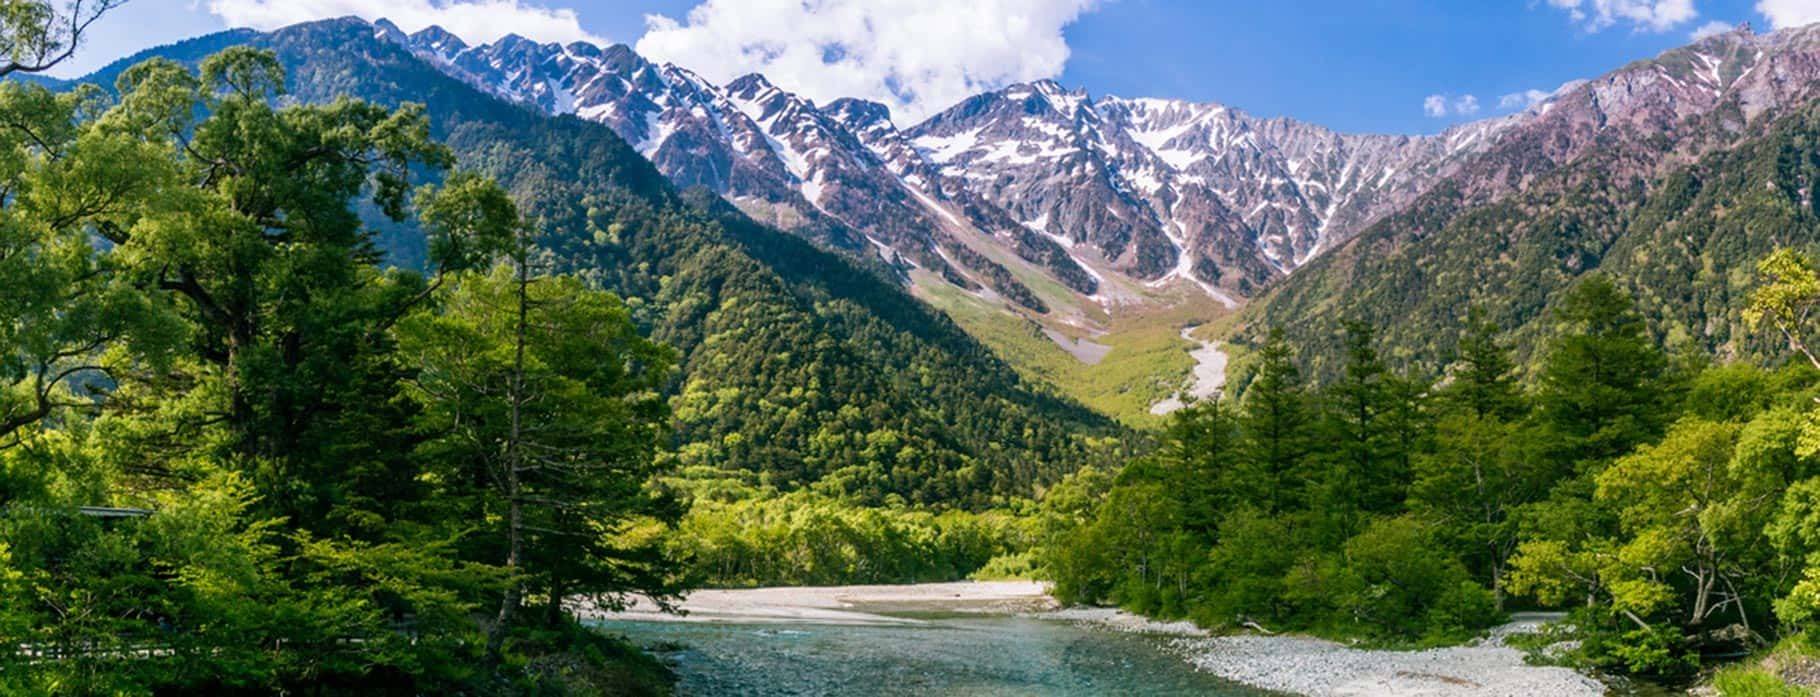 8 DAYS RURAL CHARMS OF JAPANESE ALPS